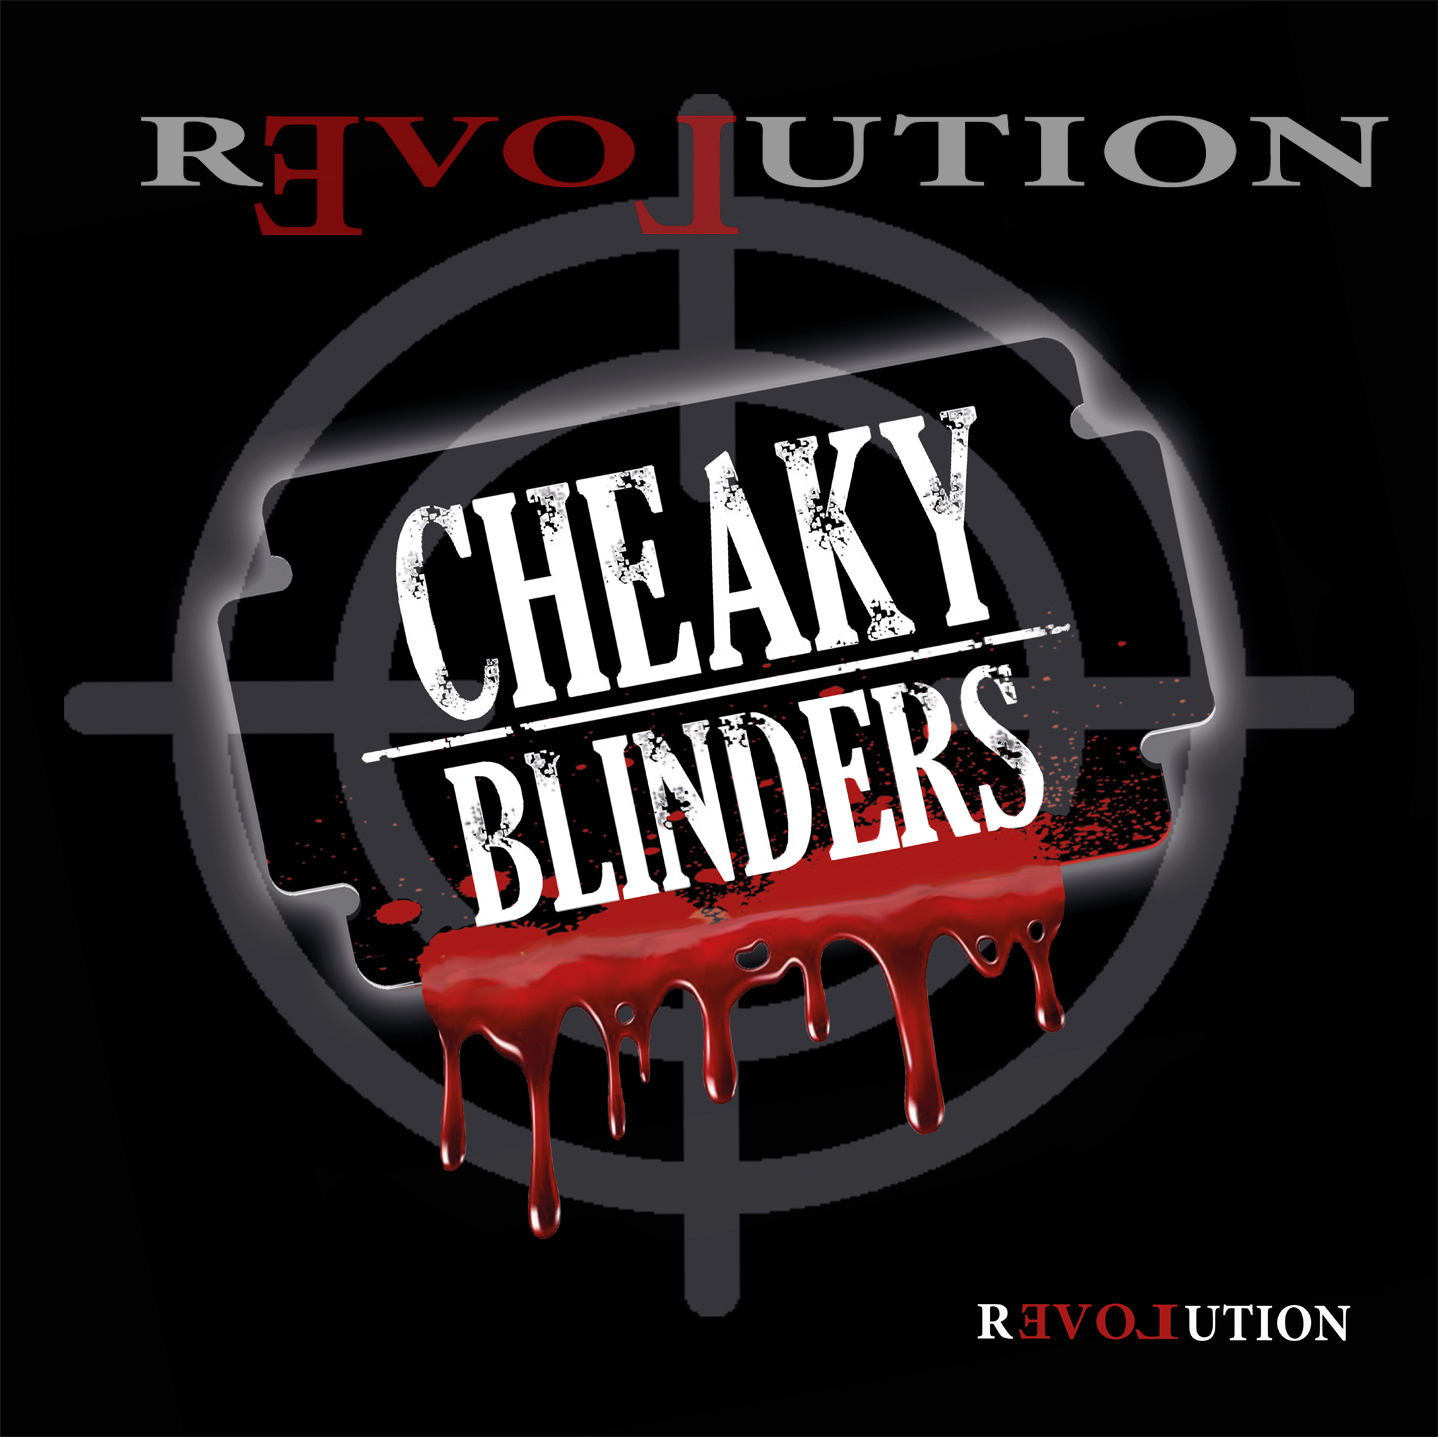 Cheaky Blinders - FRONT COVER Revolution CD OUTSIDE DOUBLE_PAGE_LAYOUT_ABLDP001.jpg